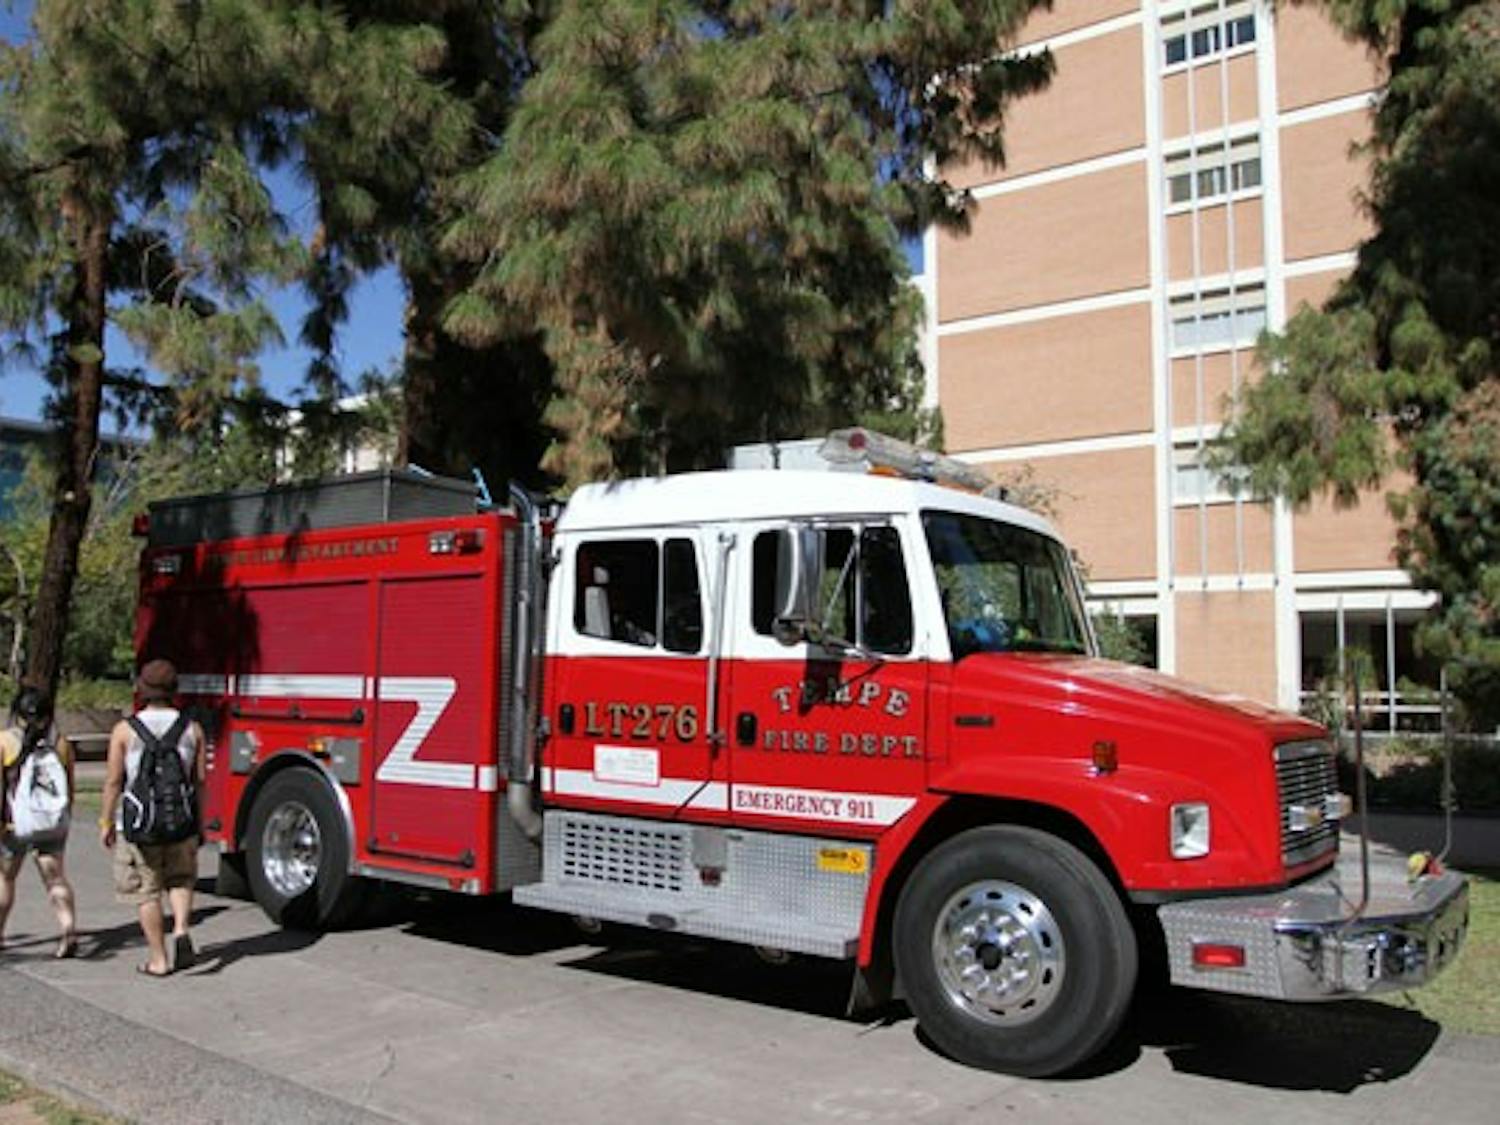 RED ALERT: A Tempe fire truck is parked in front of the Language and Literature Building in response to a 911 call on Monday afternoon. (Photo by Nikolai de Vera)